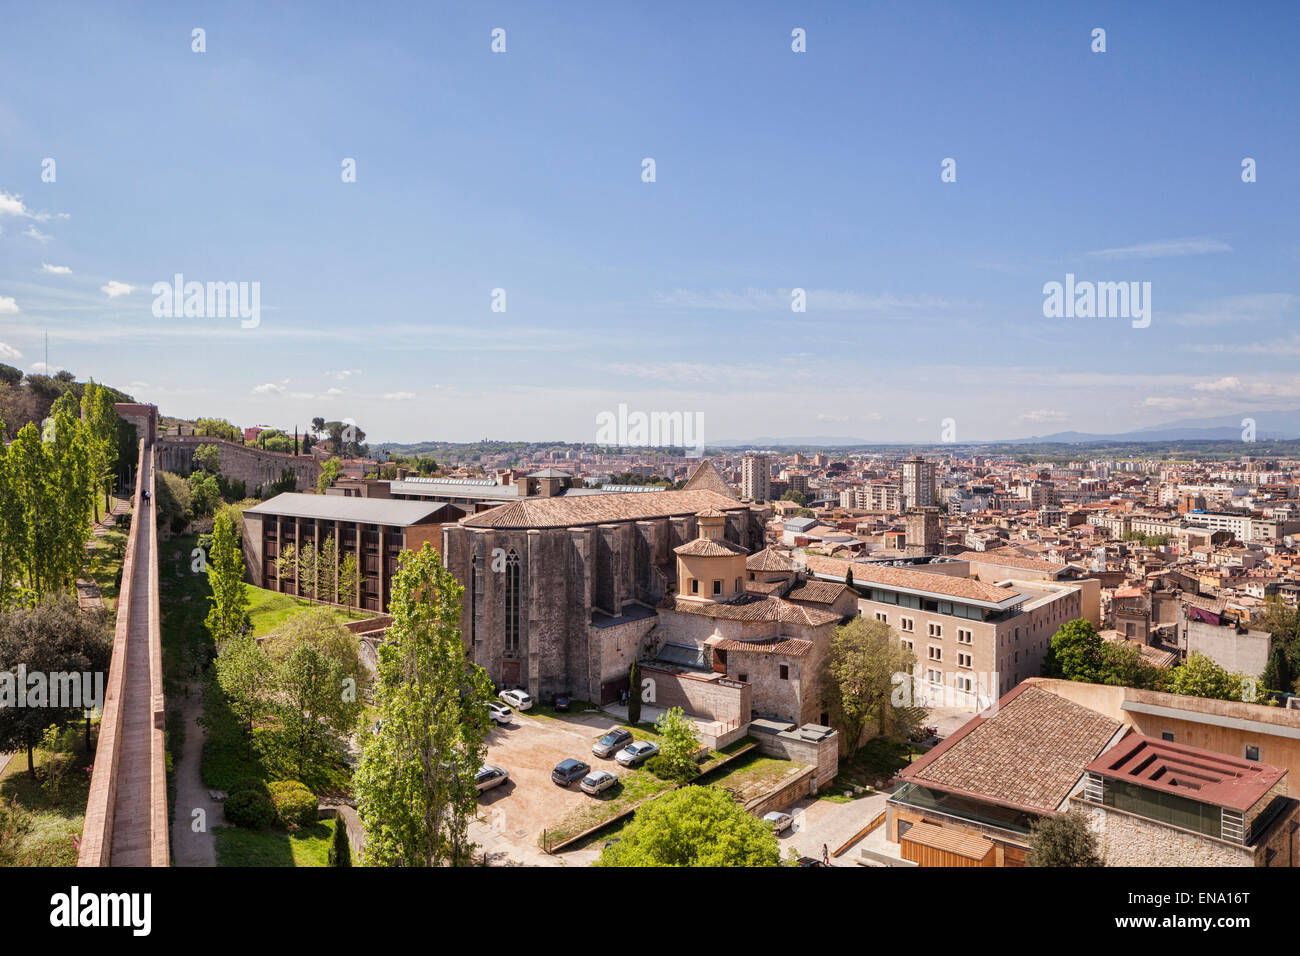 A view over the city of Girona, Catalonia, Spain. Stock Photo